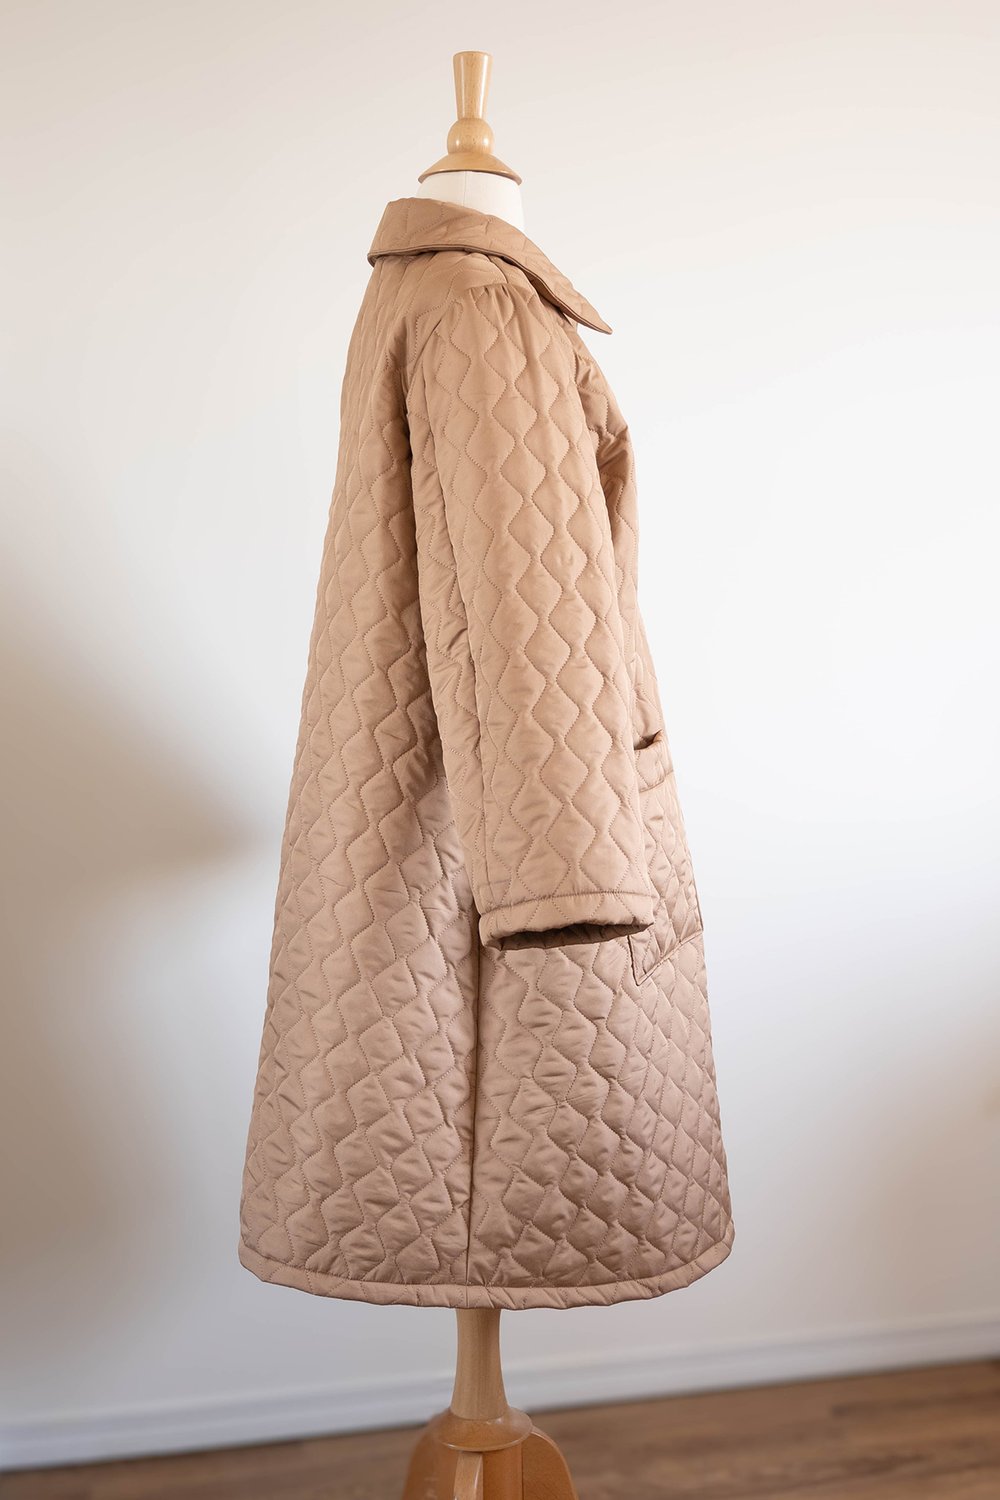 Biscuit coloured quilted coat